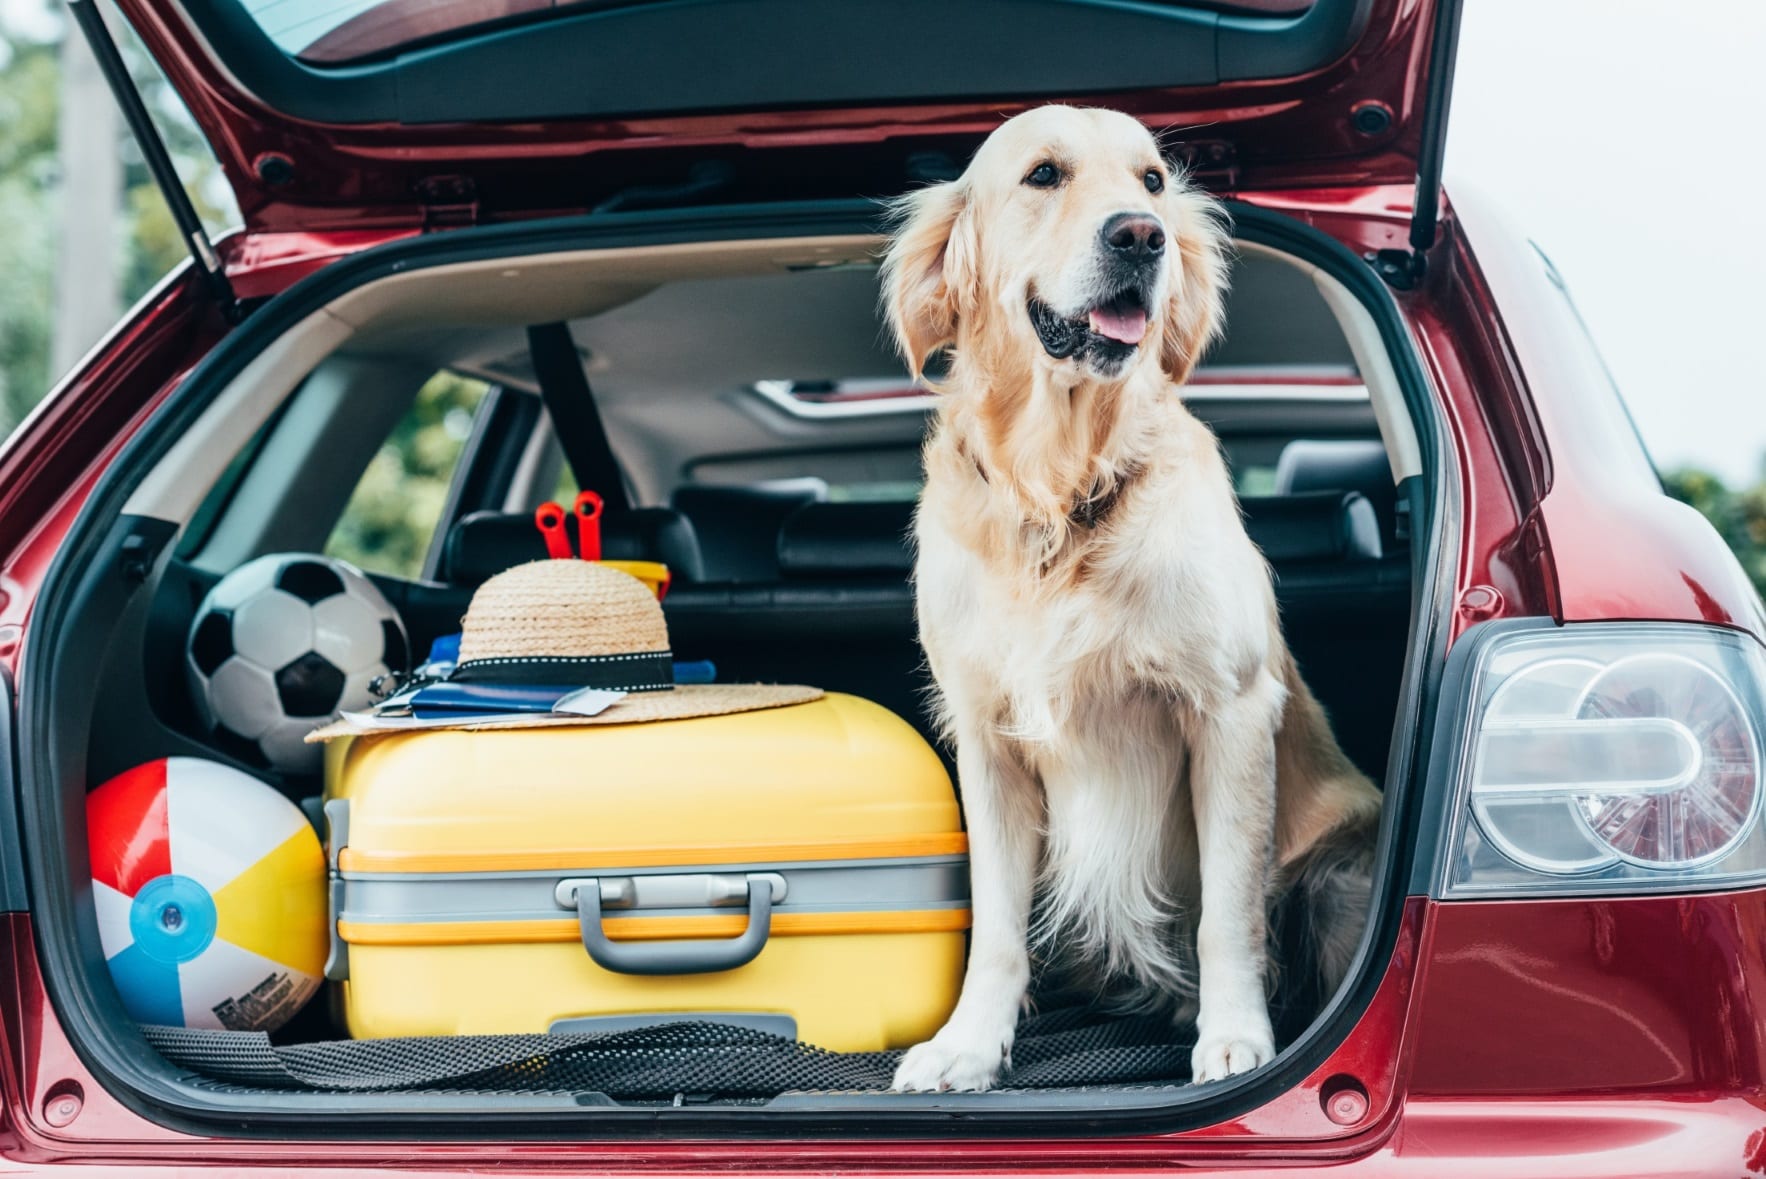 Tips for driving with dogs